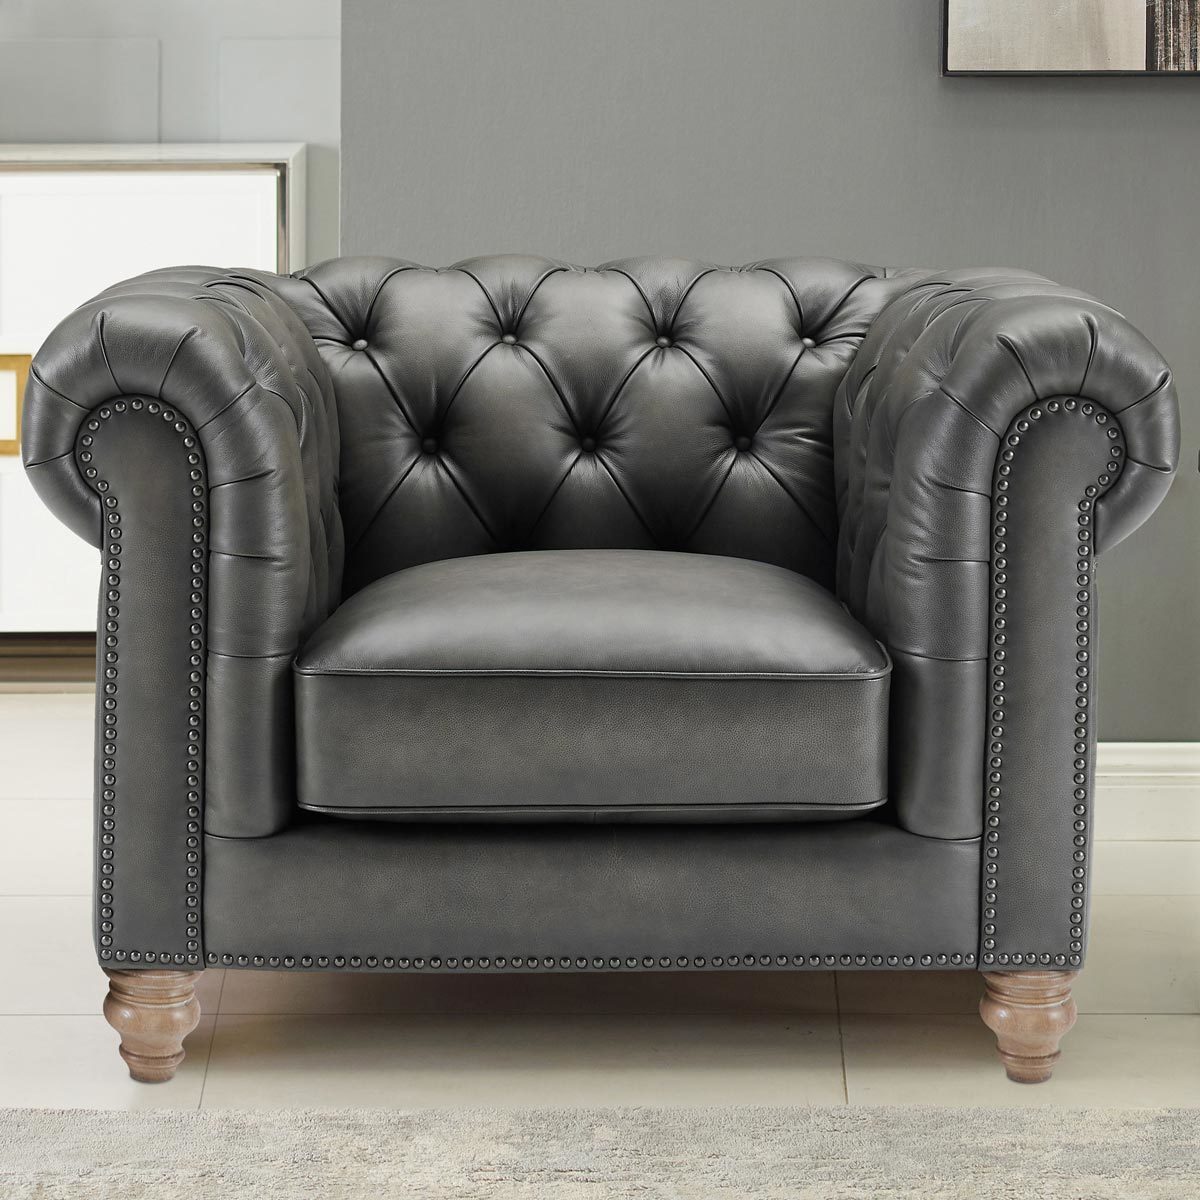 Allington Grey Leather Chesterfield Armchair - Signature Retail Stores